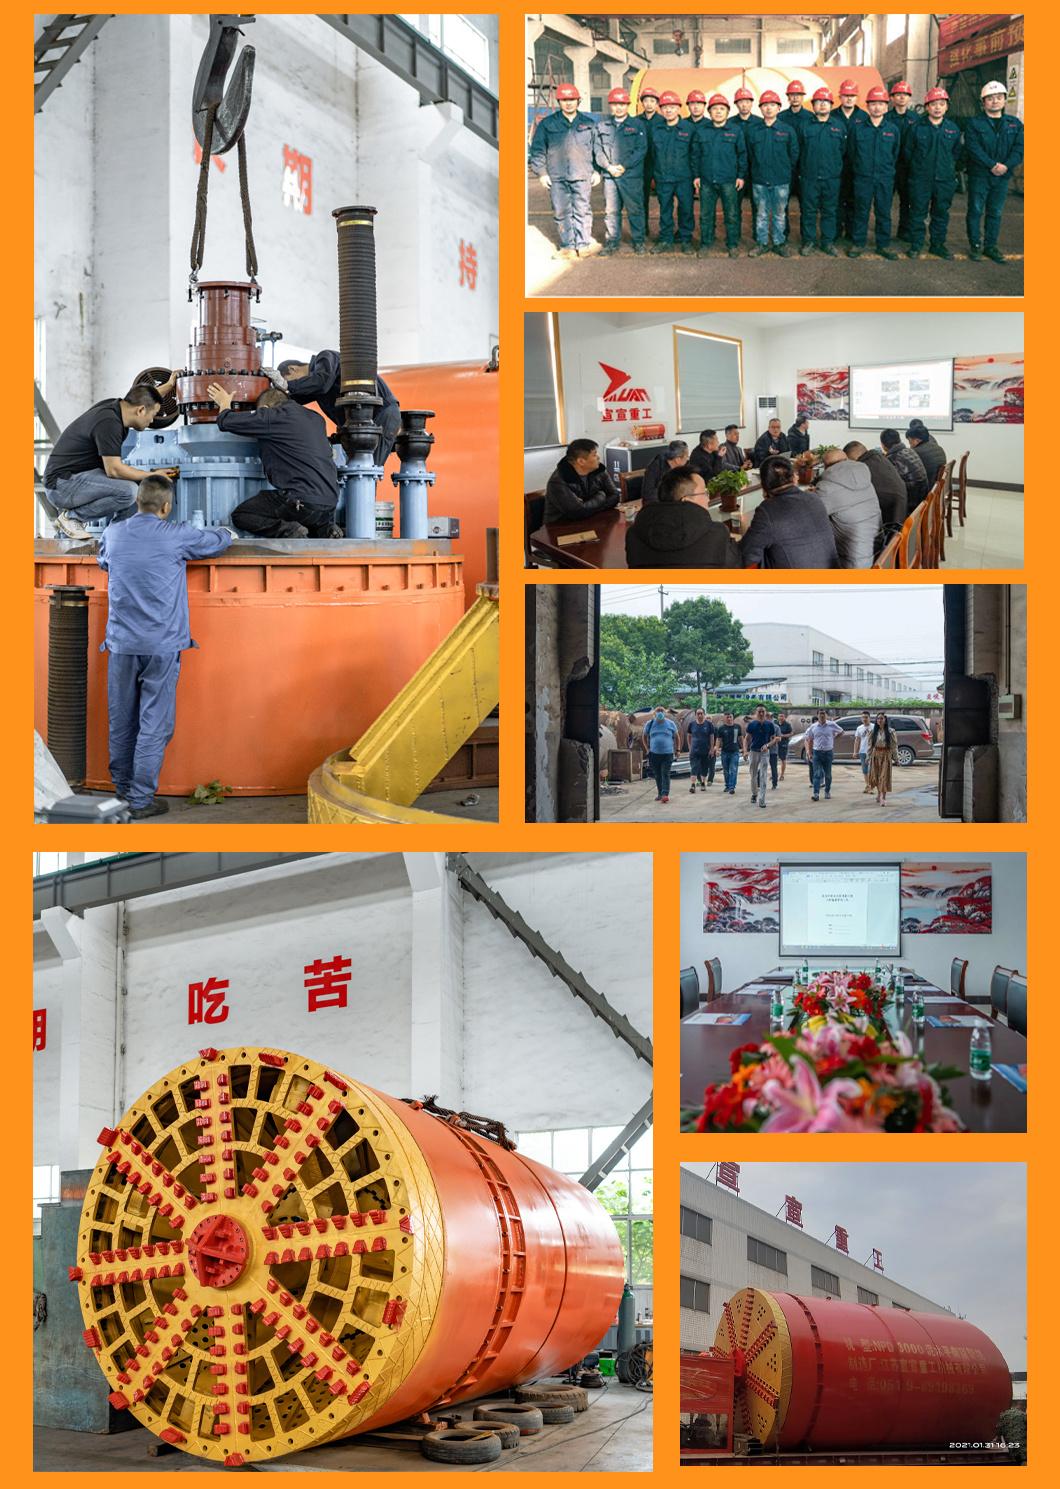 Popular Trenchless Project Ysd3000 Rock Pipe Jacking Machine for Rcc with Good Price